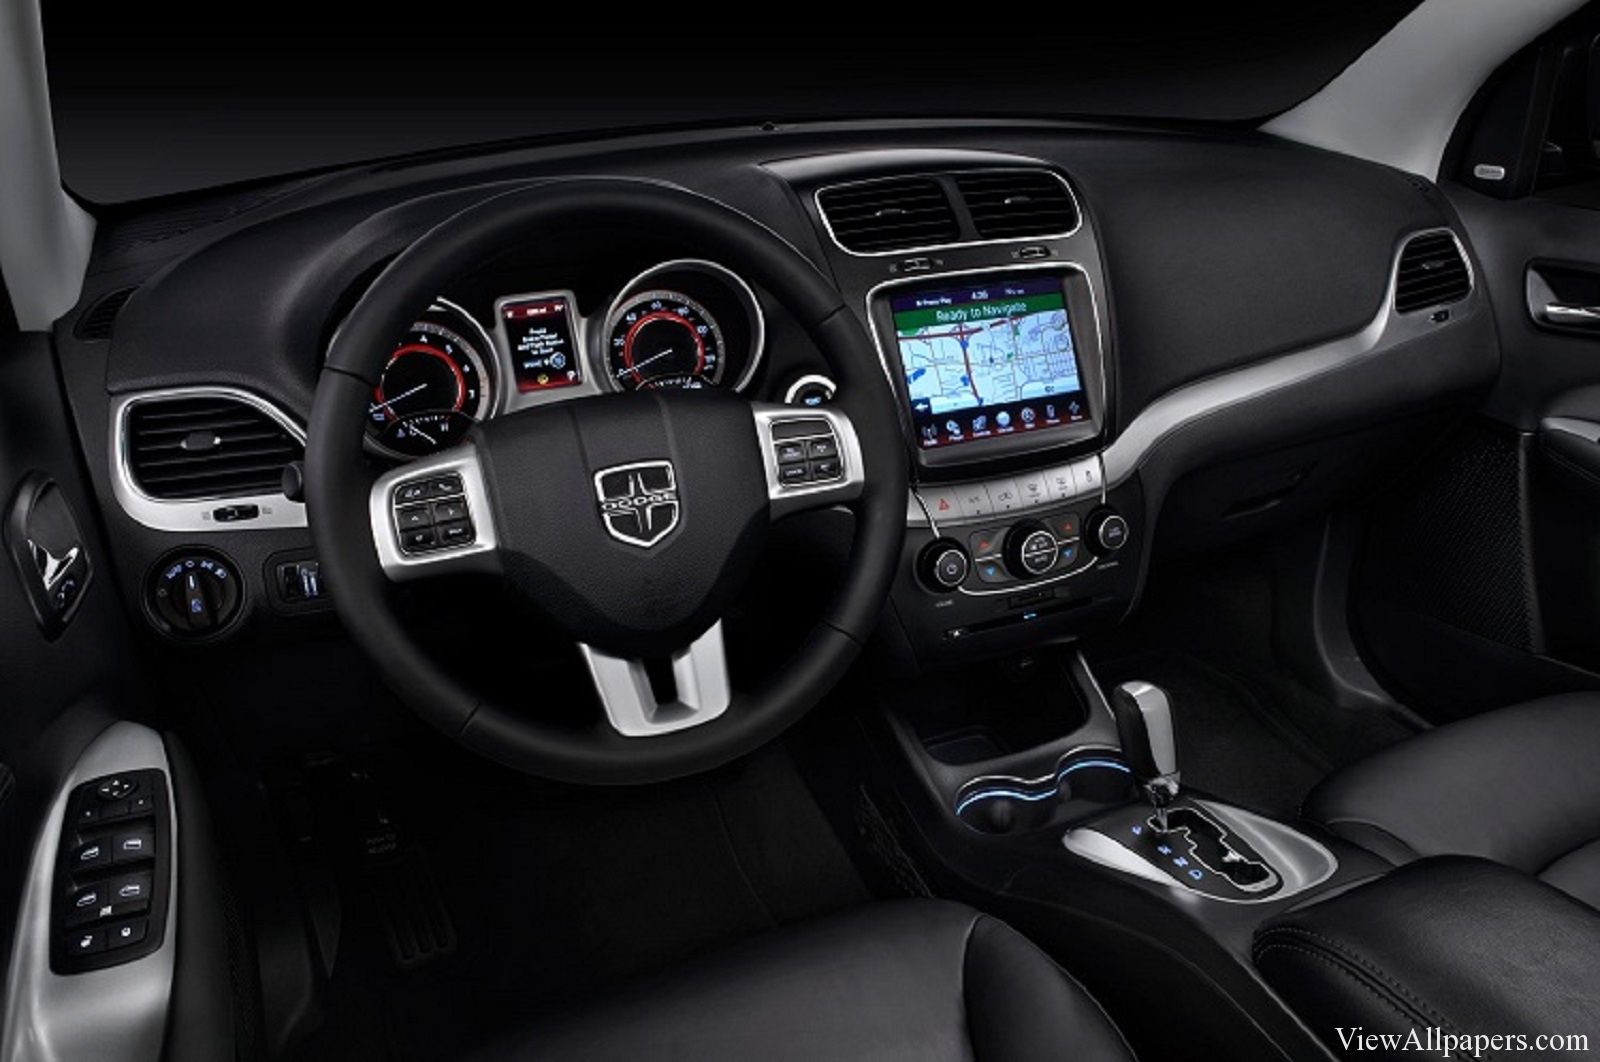 2016 Dodge Journey Interior | Cars HD Wallpapers | Dodge journey, 2016  dodge journey, 2012 dodge journey